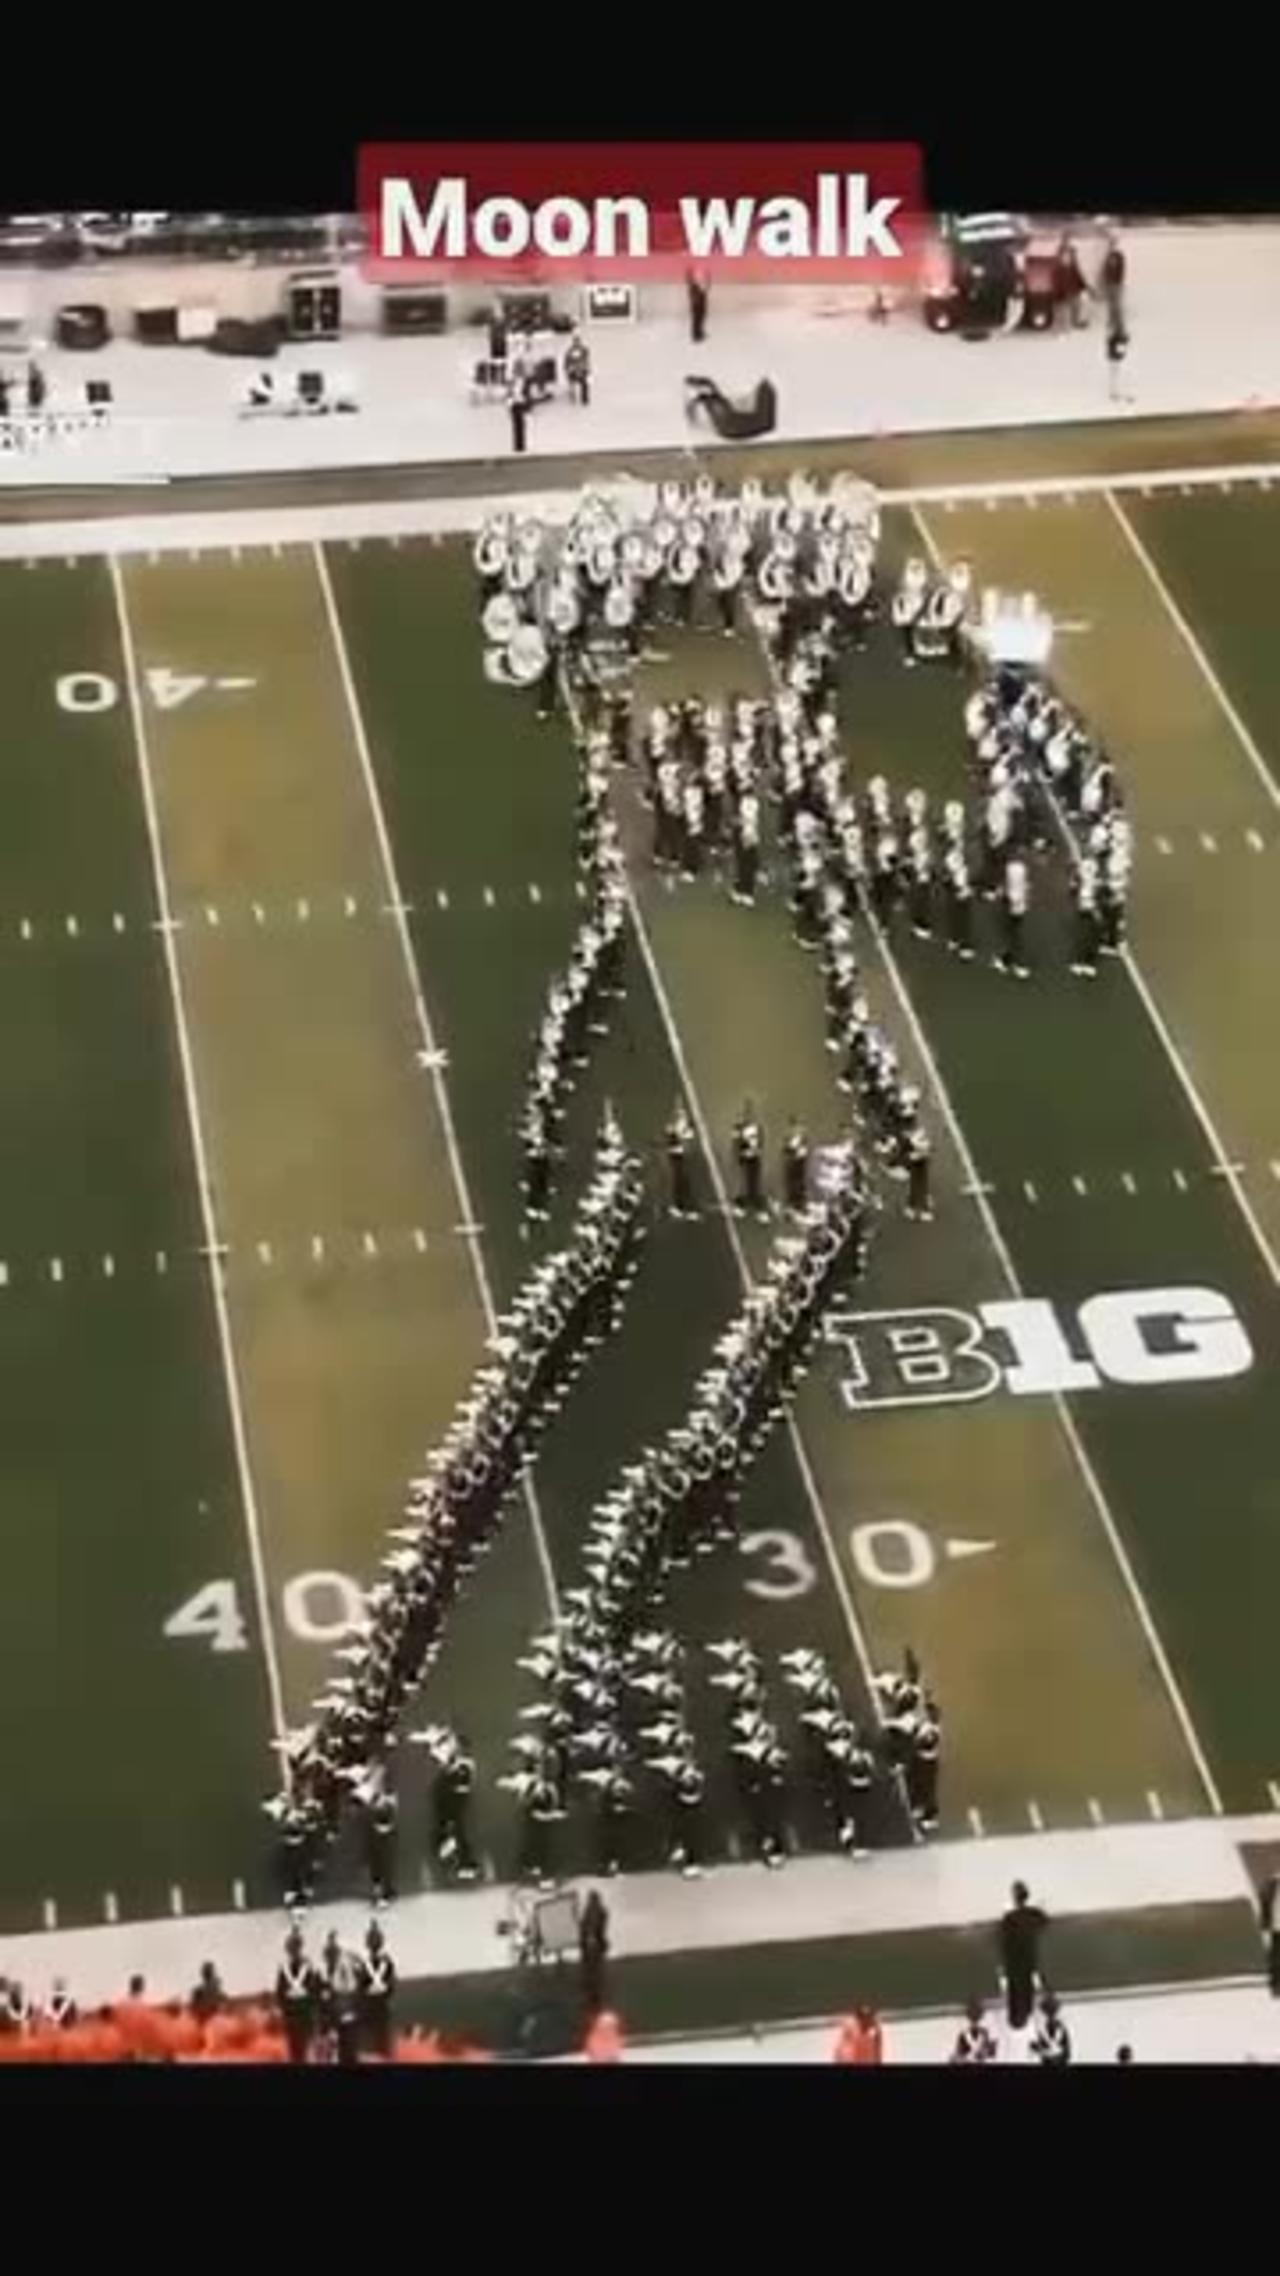 This marching band is absolutely amazing 👏🏾